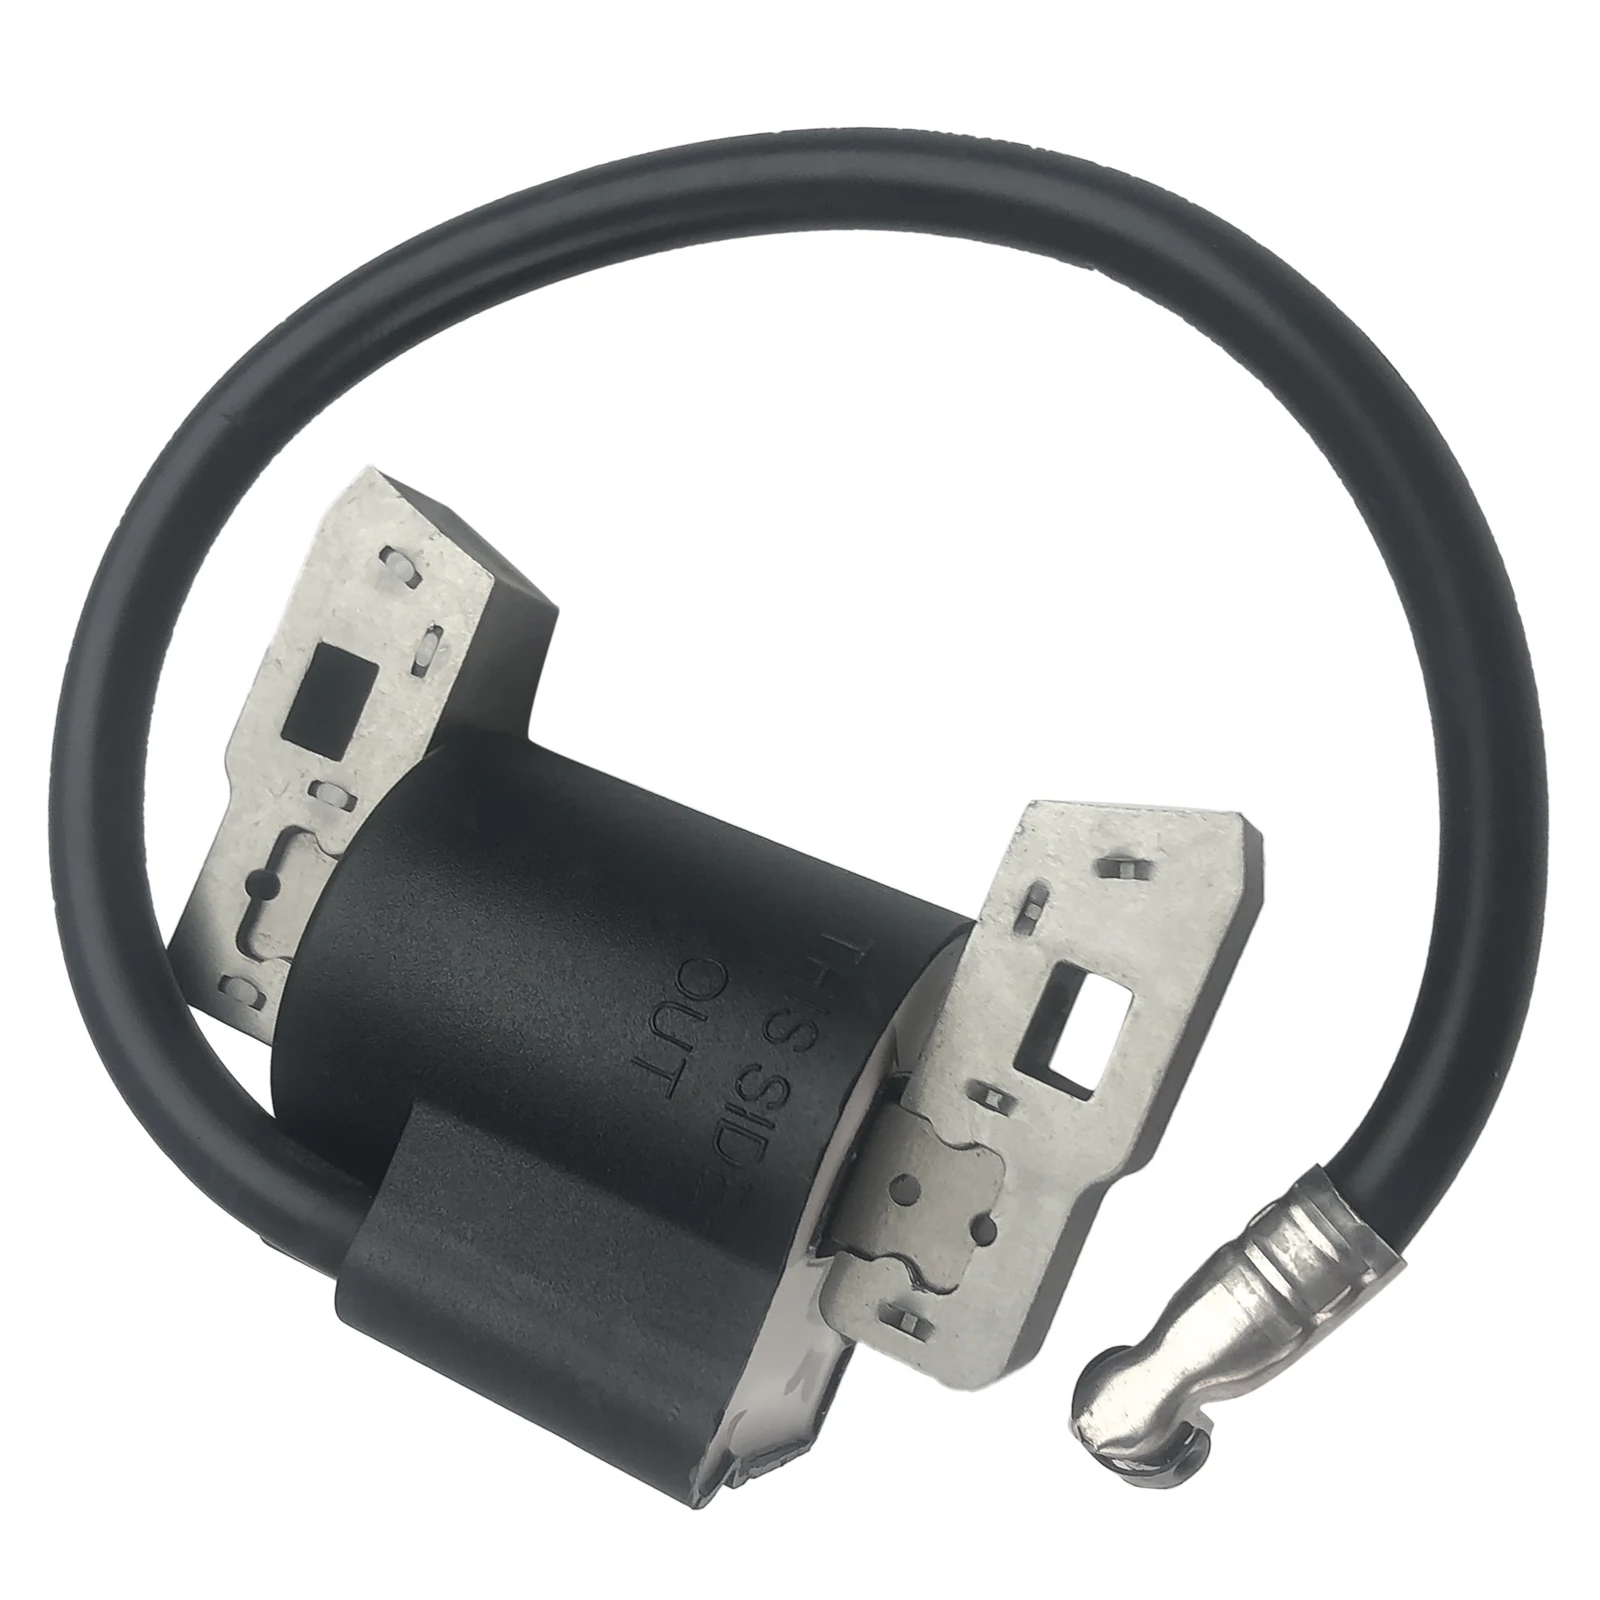 

Replace Ignition Coil for Briggs & Stratton 5HP 395491 395490 397358 697037 298316 100201 133232 Arrowhead IBS3002 Stens 440-401